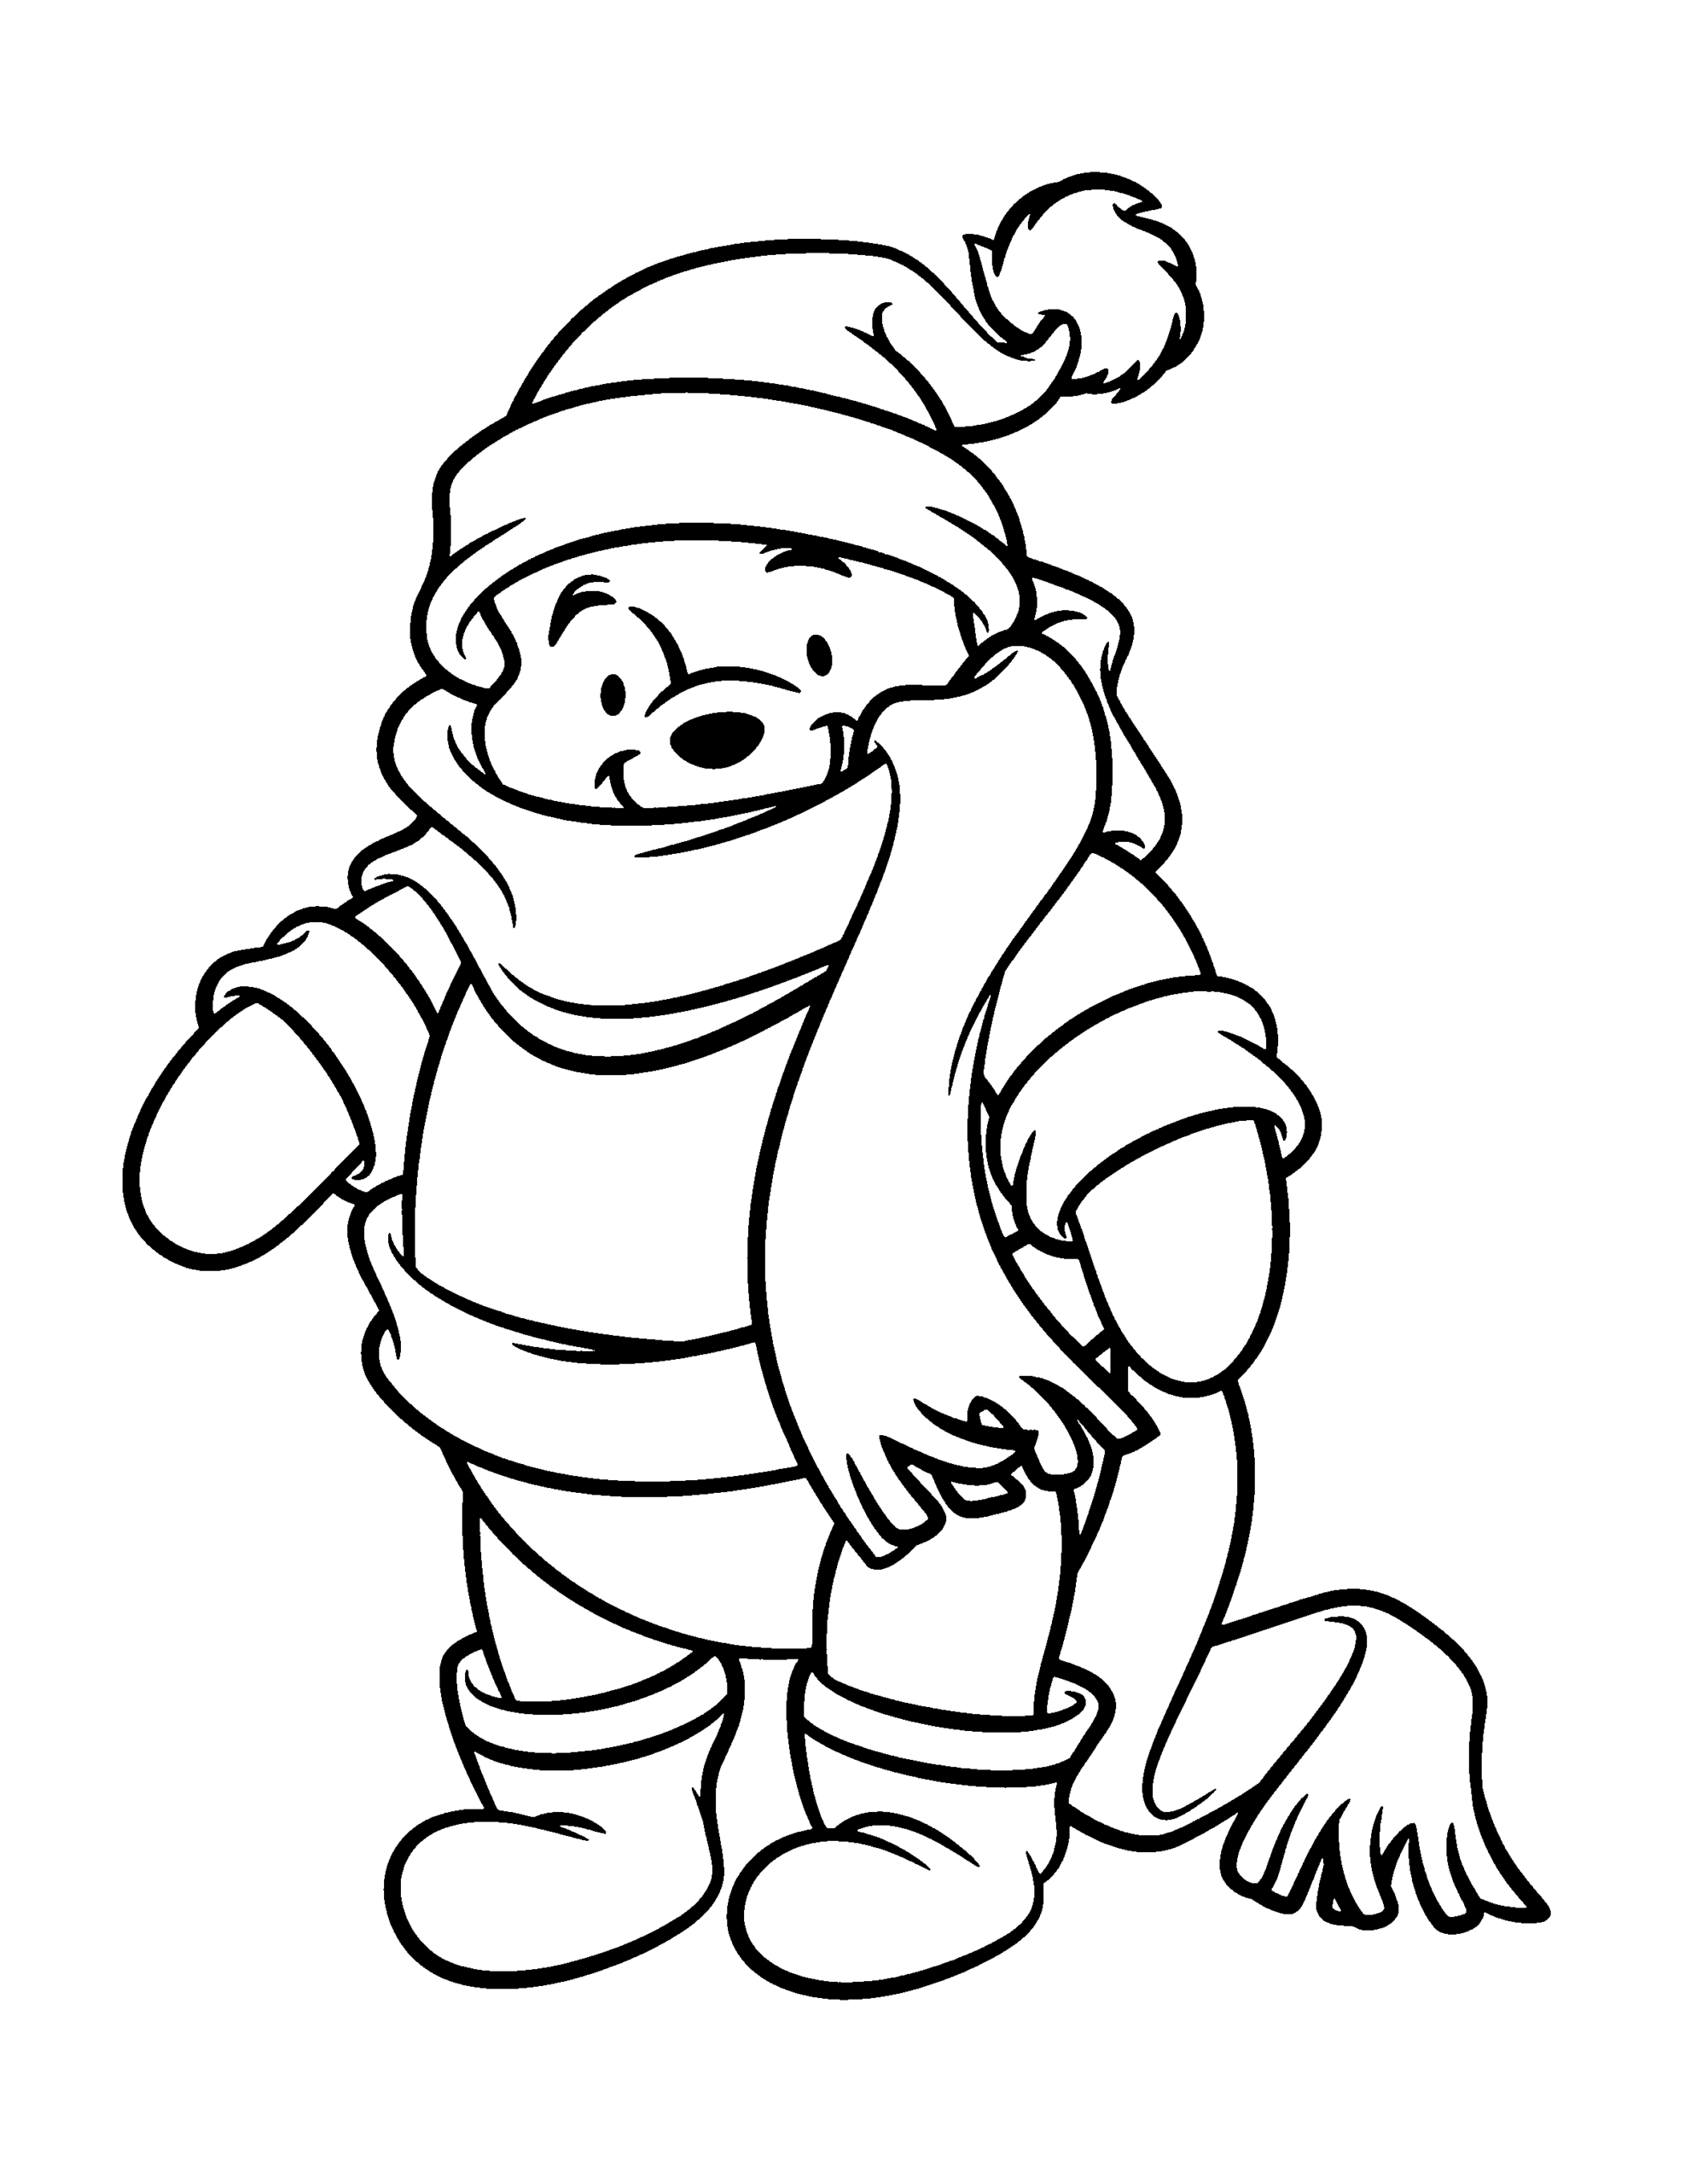 Winnie the Pooh Coloring Pages Cartoons Pooh Dressed for Winter Printable 2020 7004 Coloring4free